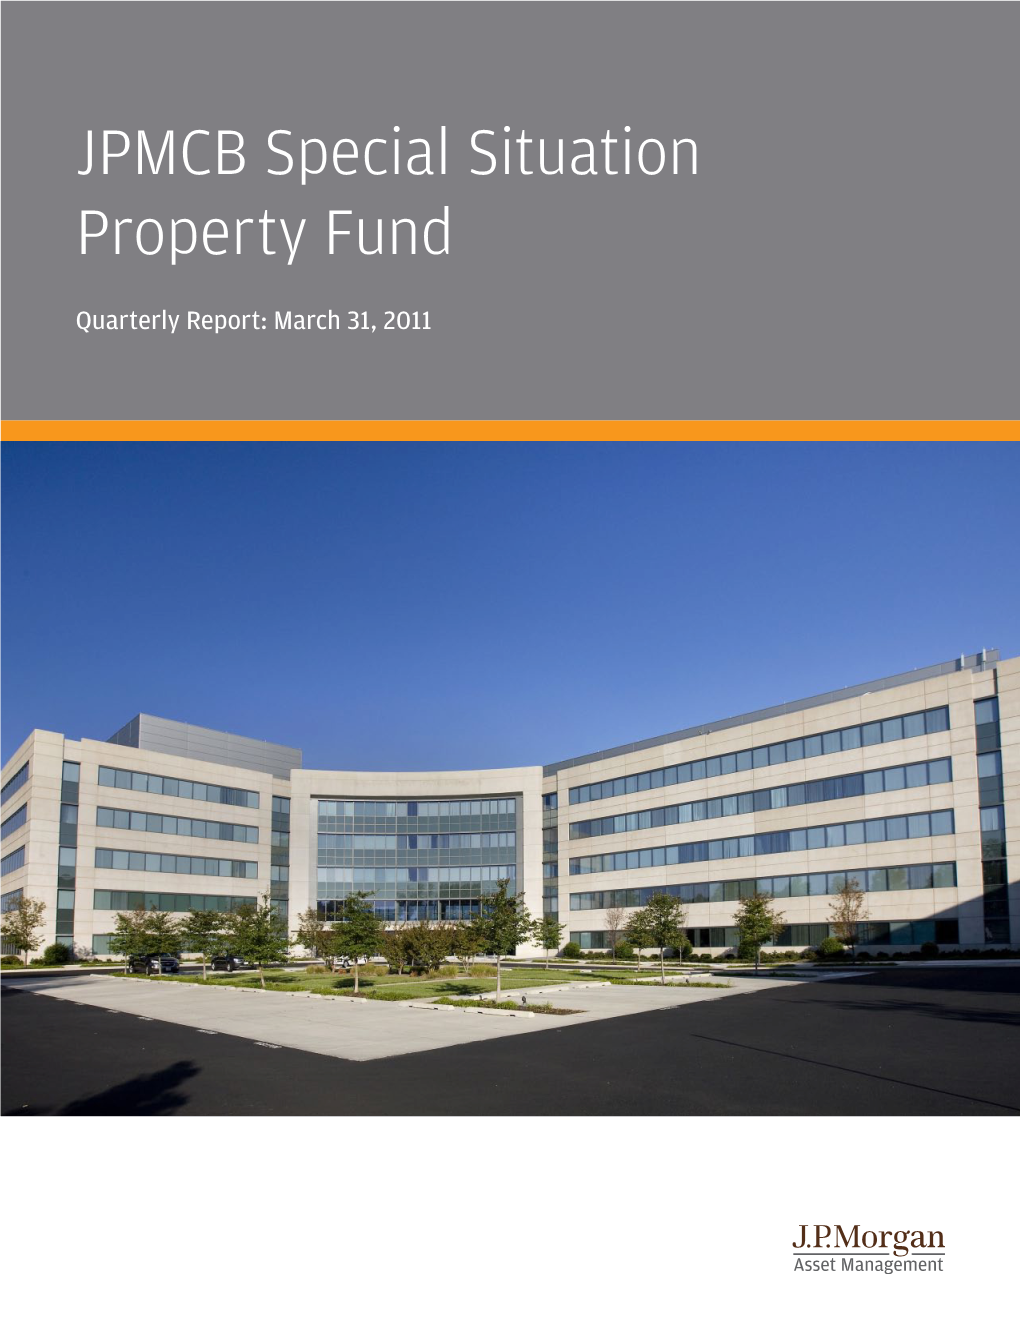 JPMCB Special Situation Property Fund